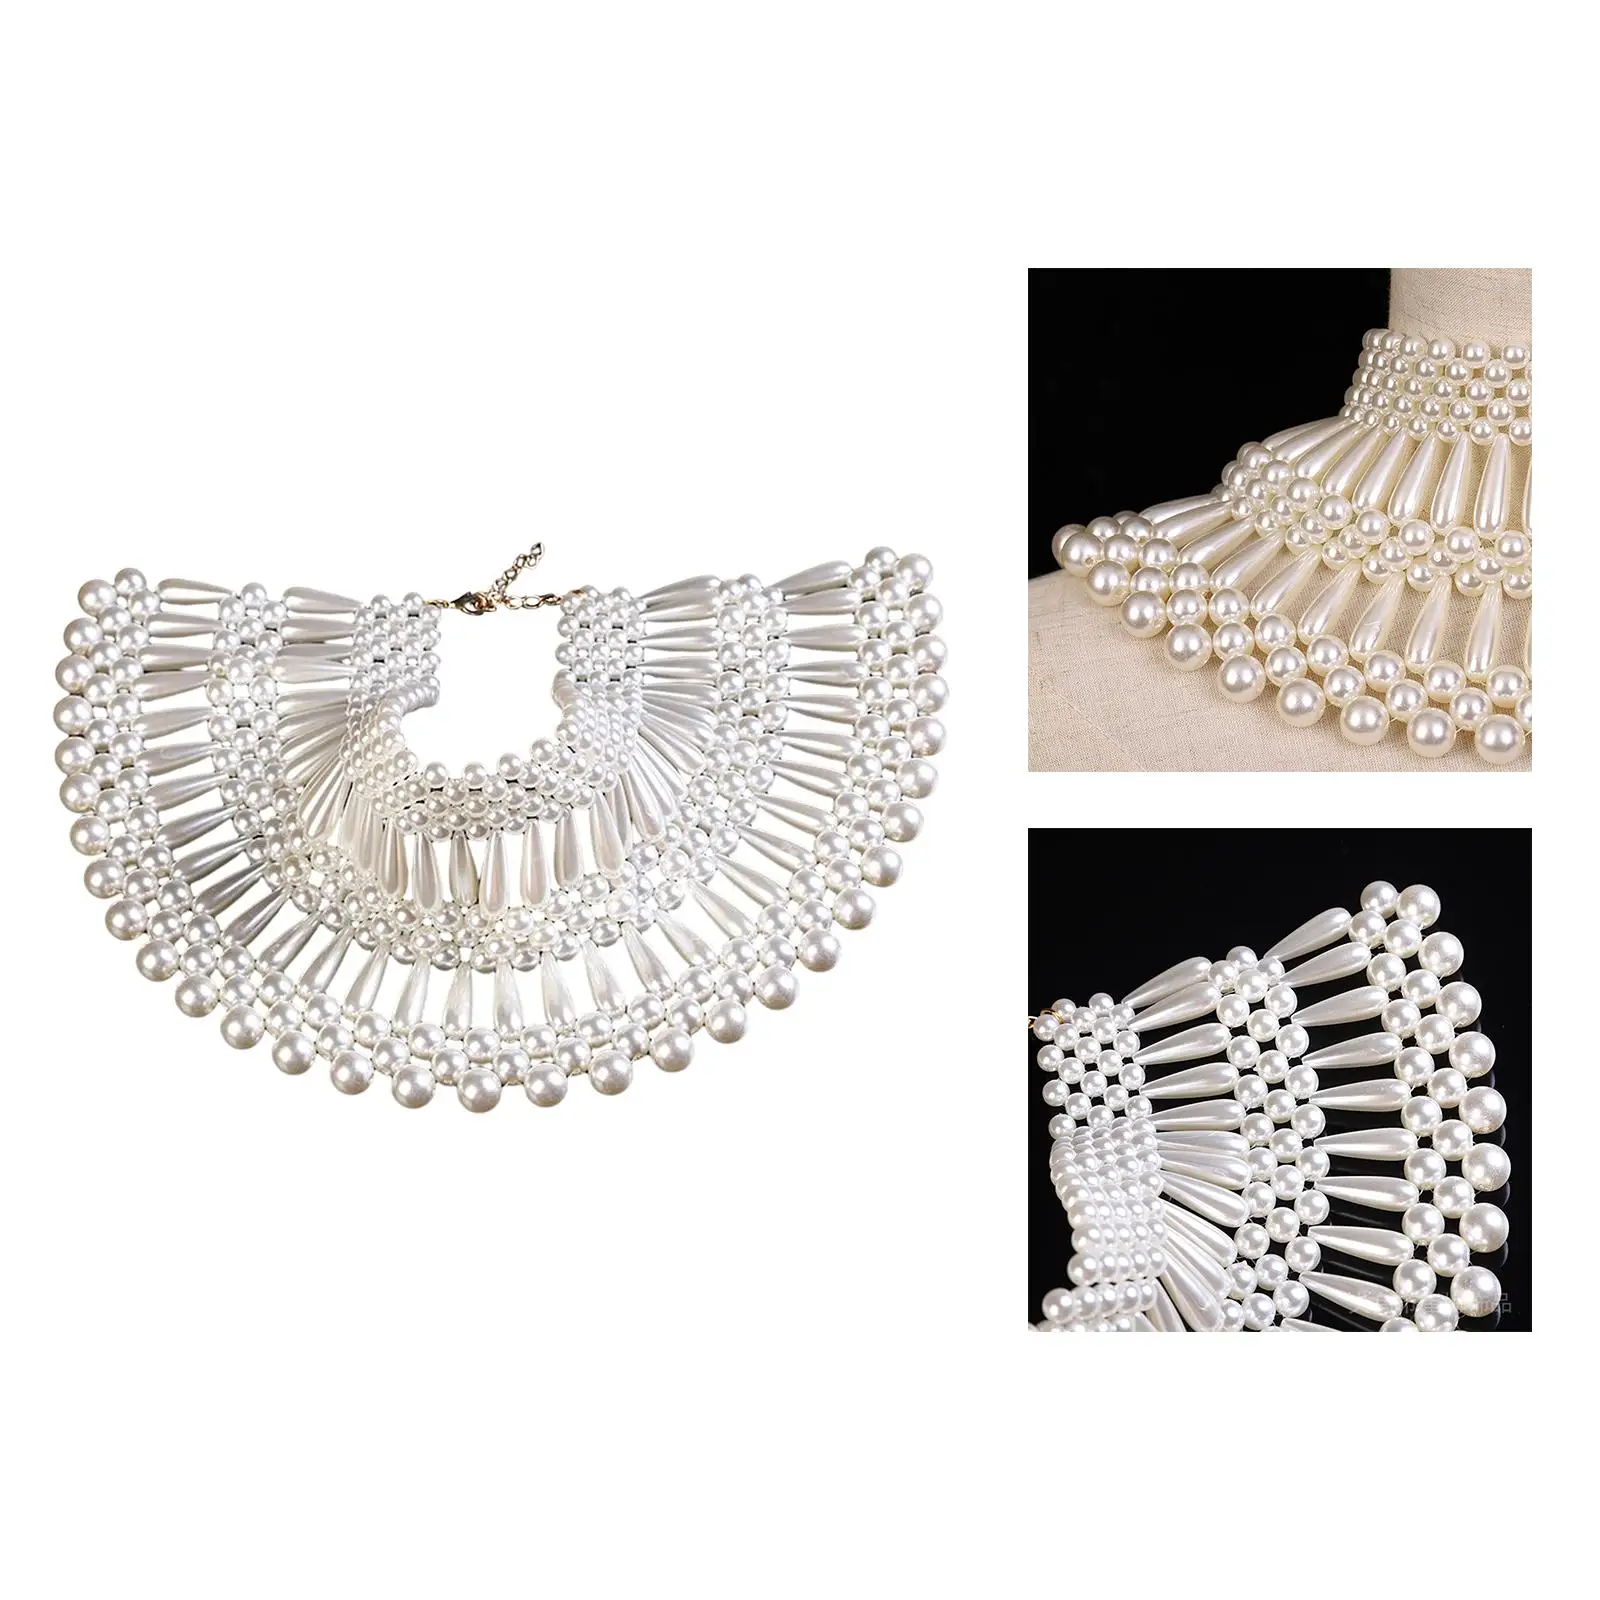 Simulated Pearl Necklace for Women, Body Statement Jewelry, Fashion Collar Bib Necklace Costume